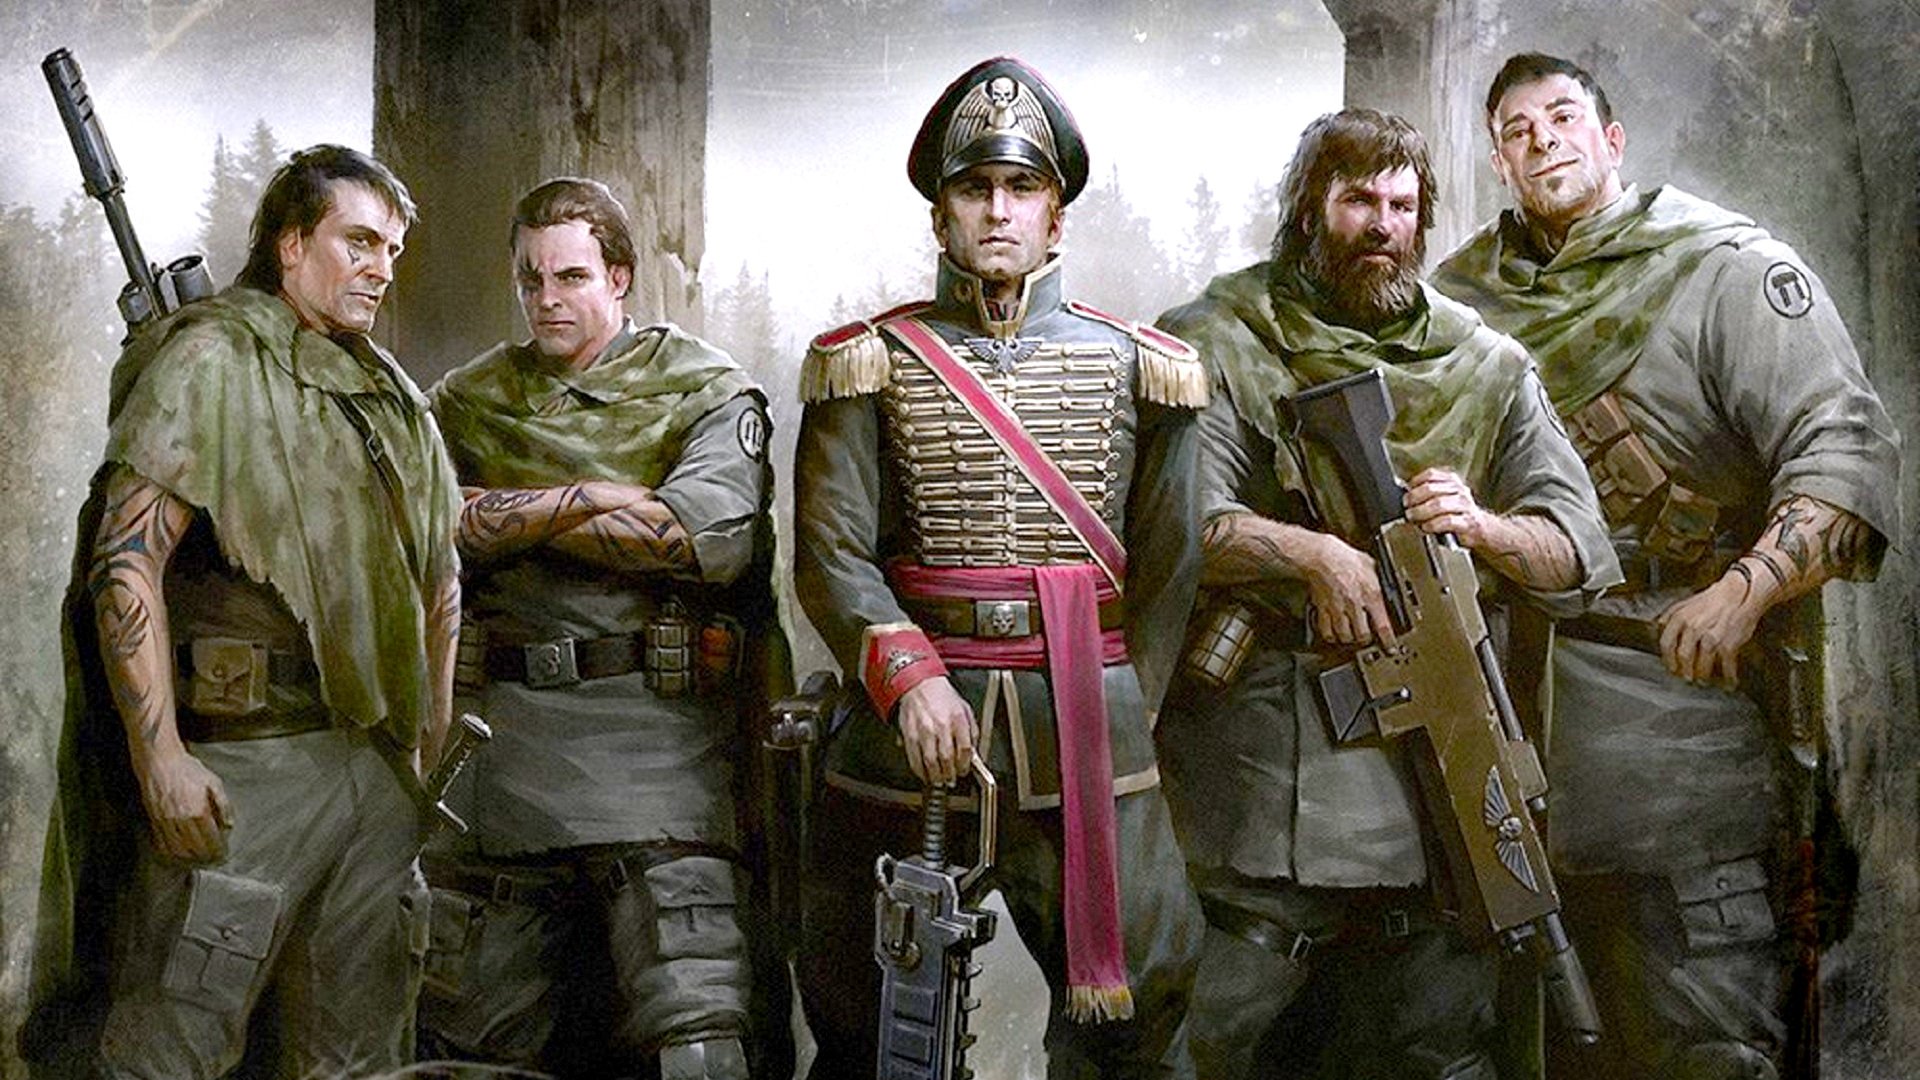 Meet the Iconic Characters of Warhammer 40k 2